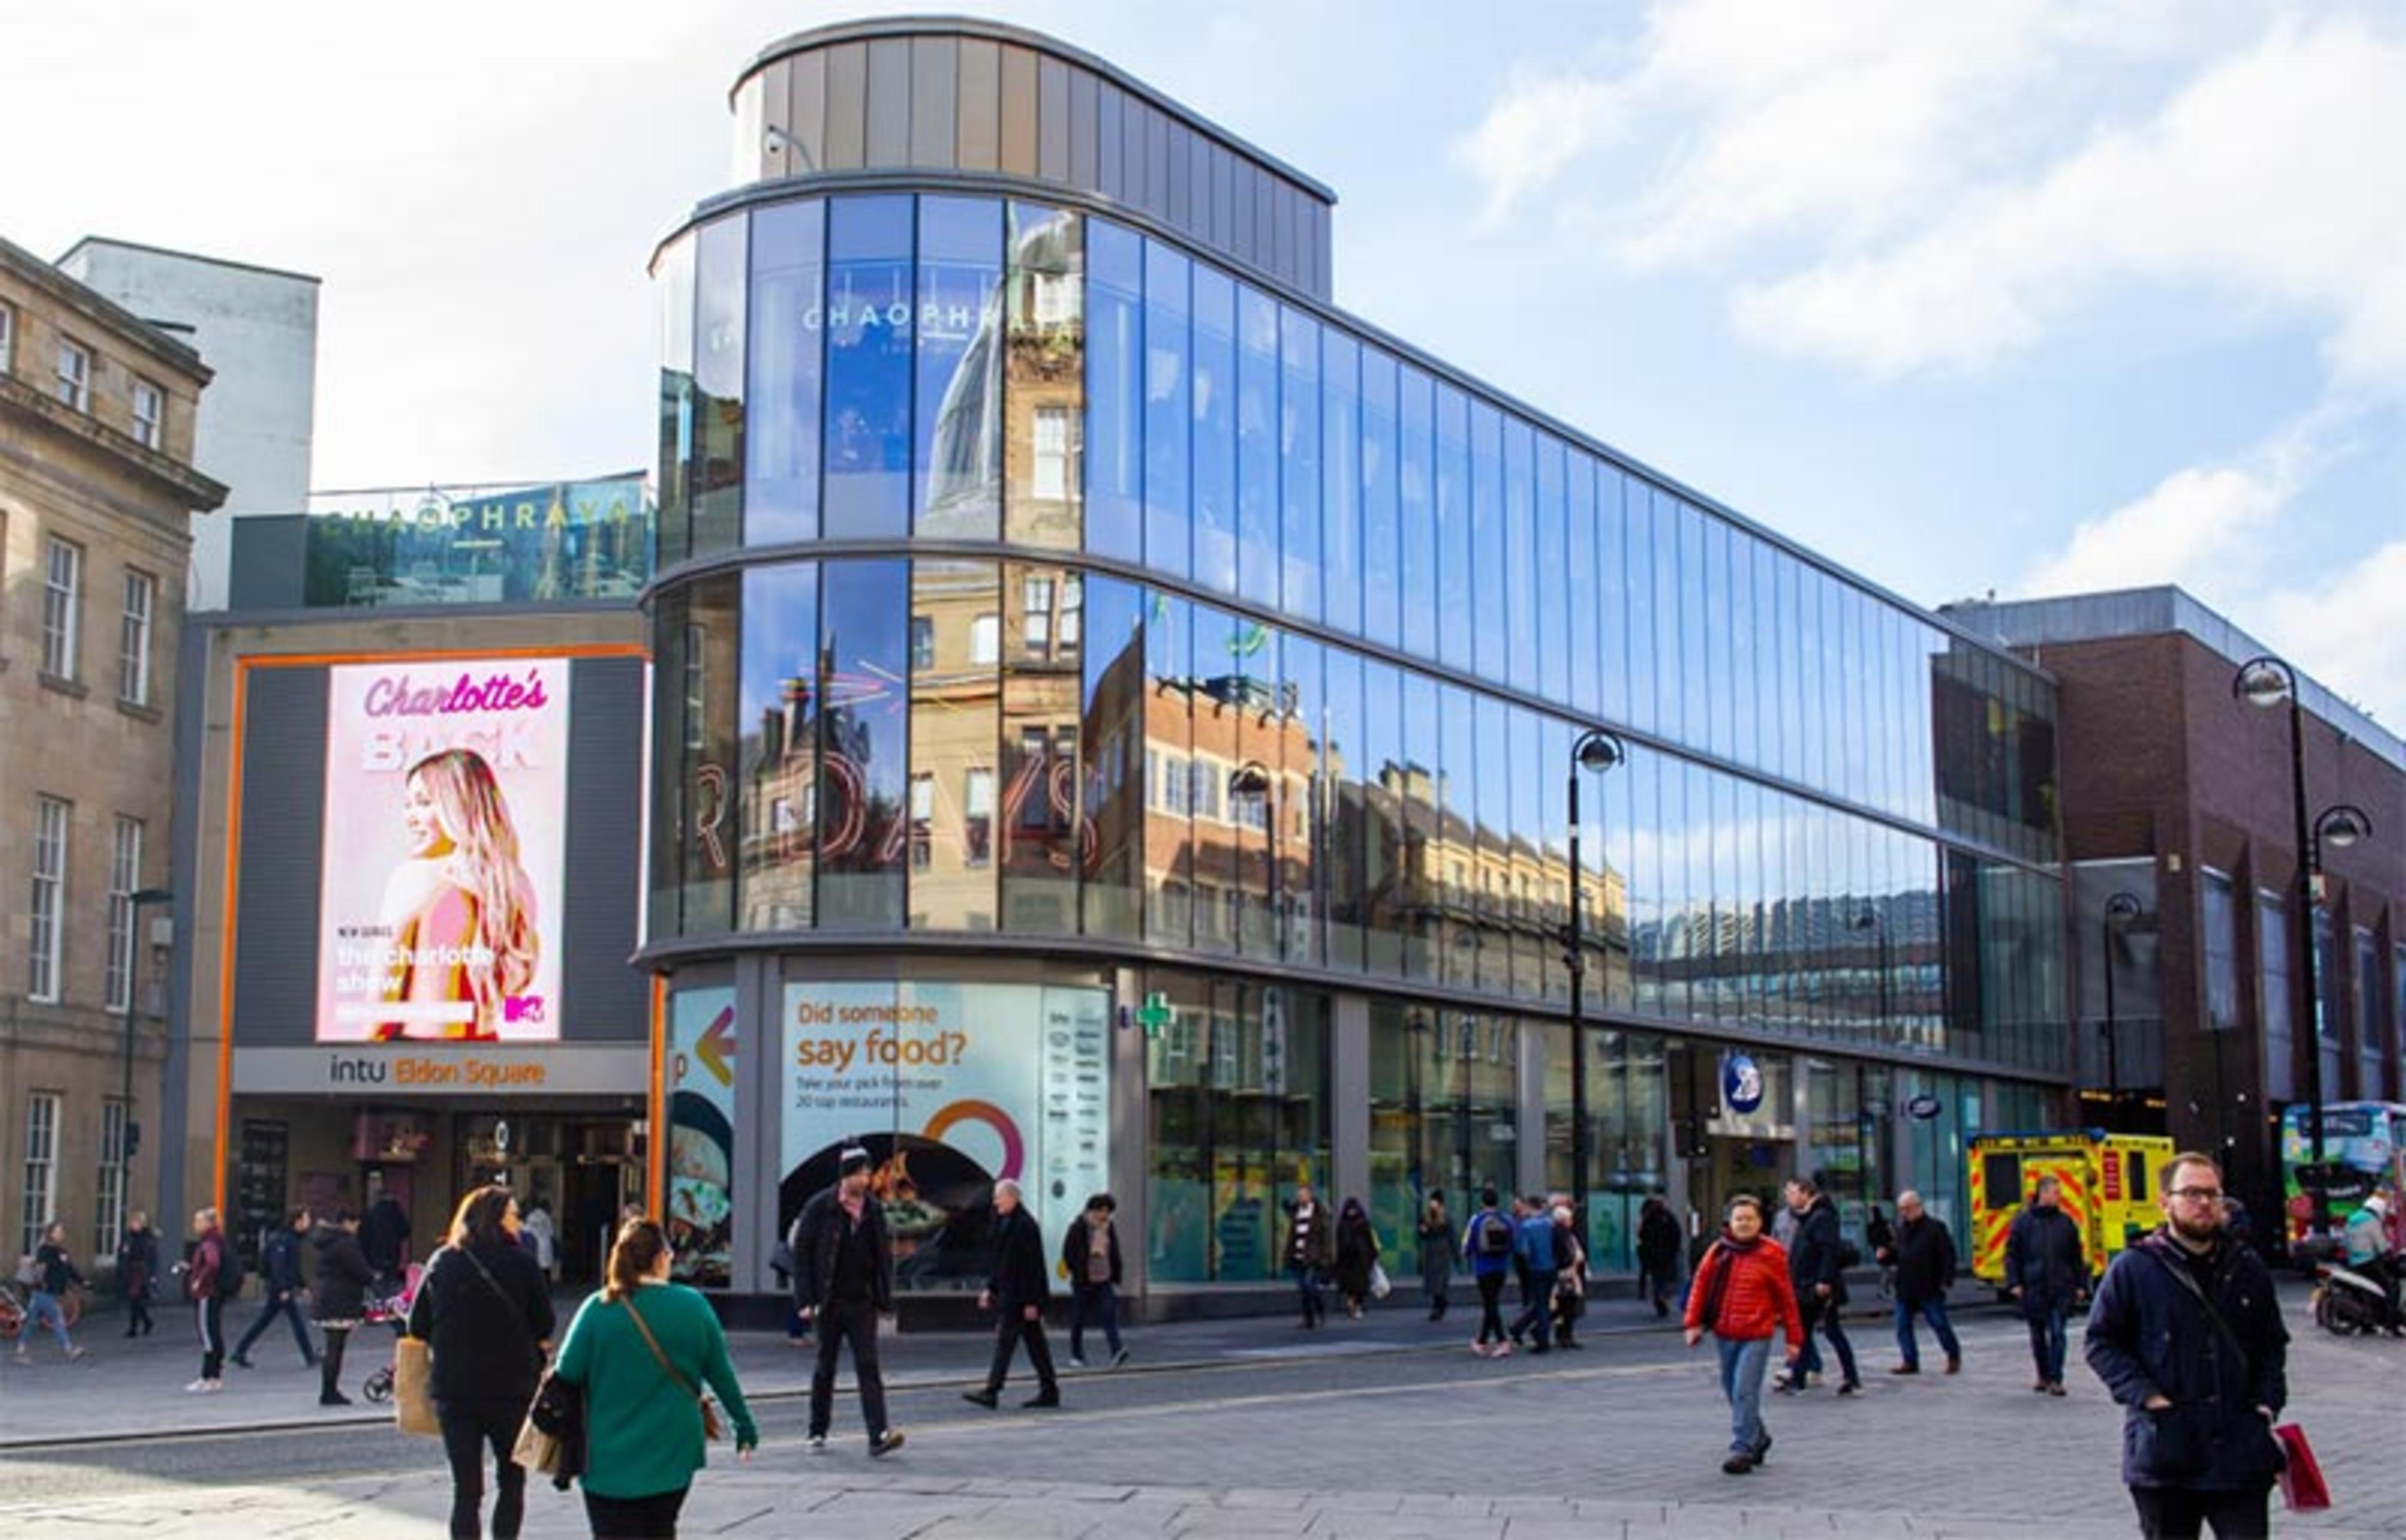 Image of Eldon Square shopping centre in Newcastle city centre with people walking around